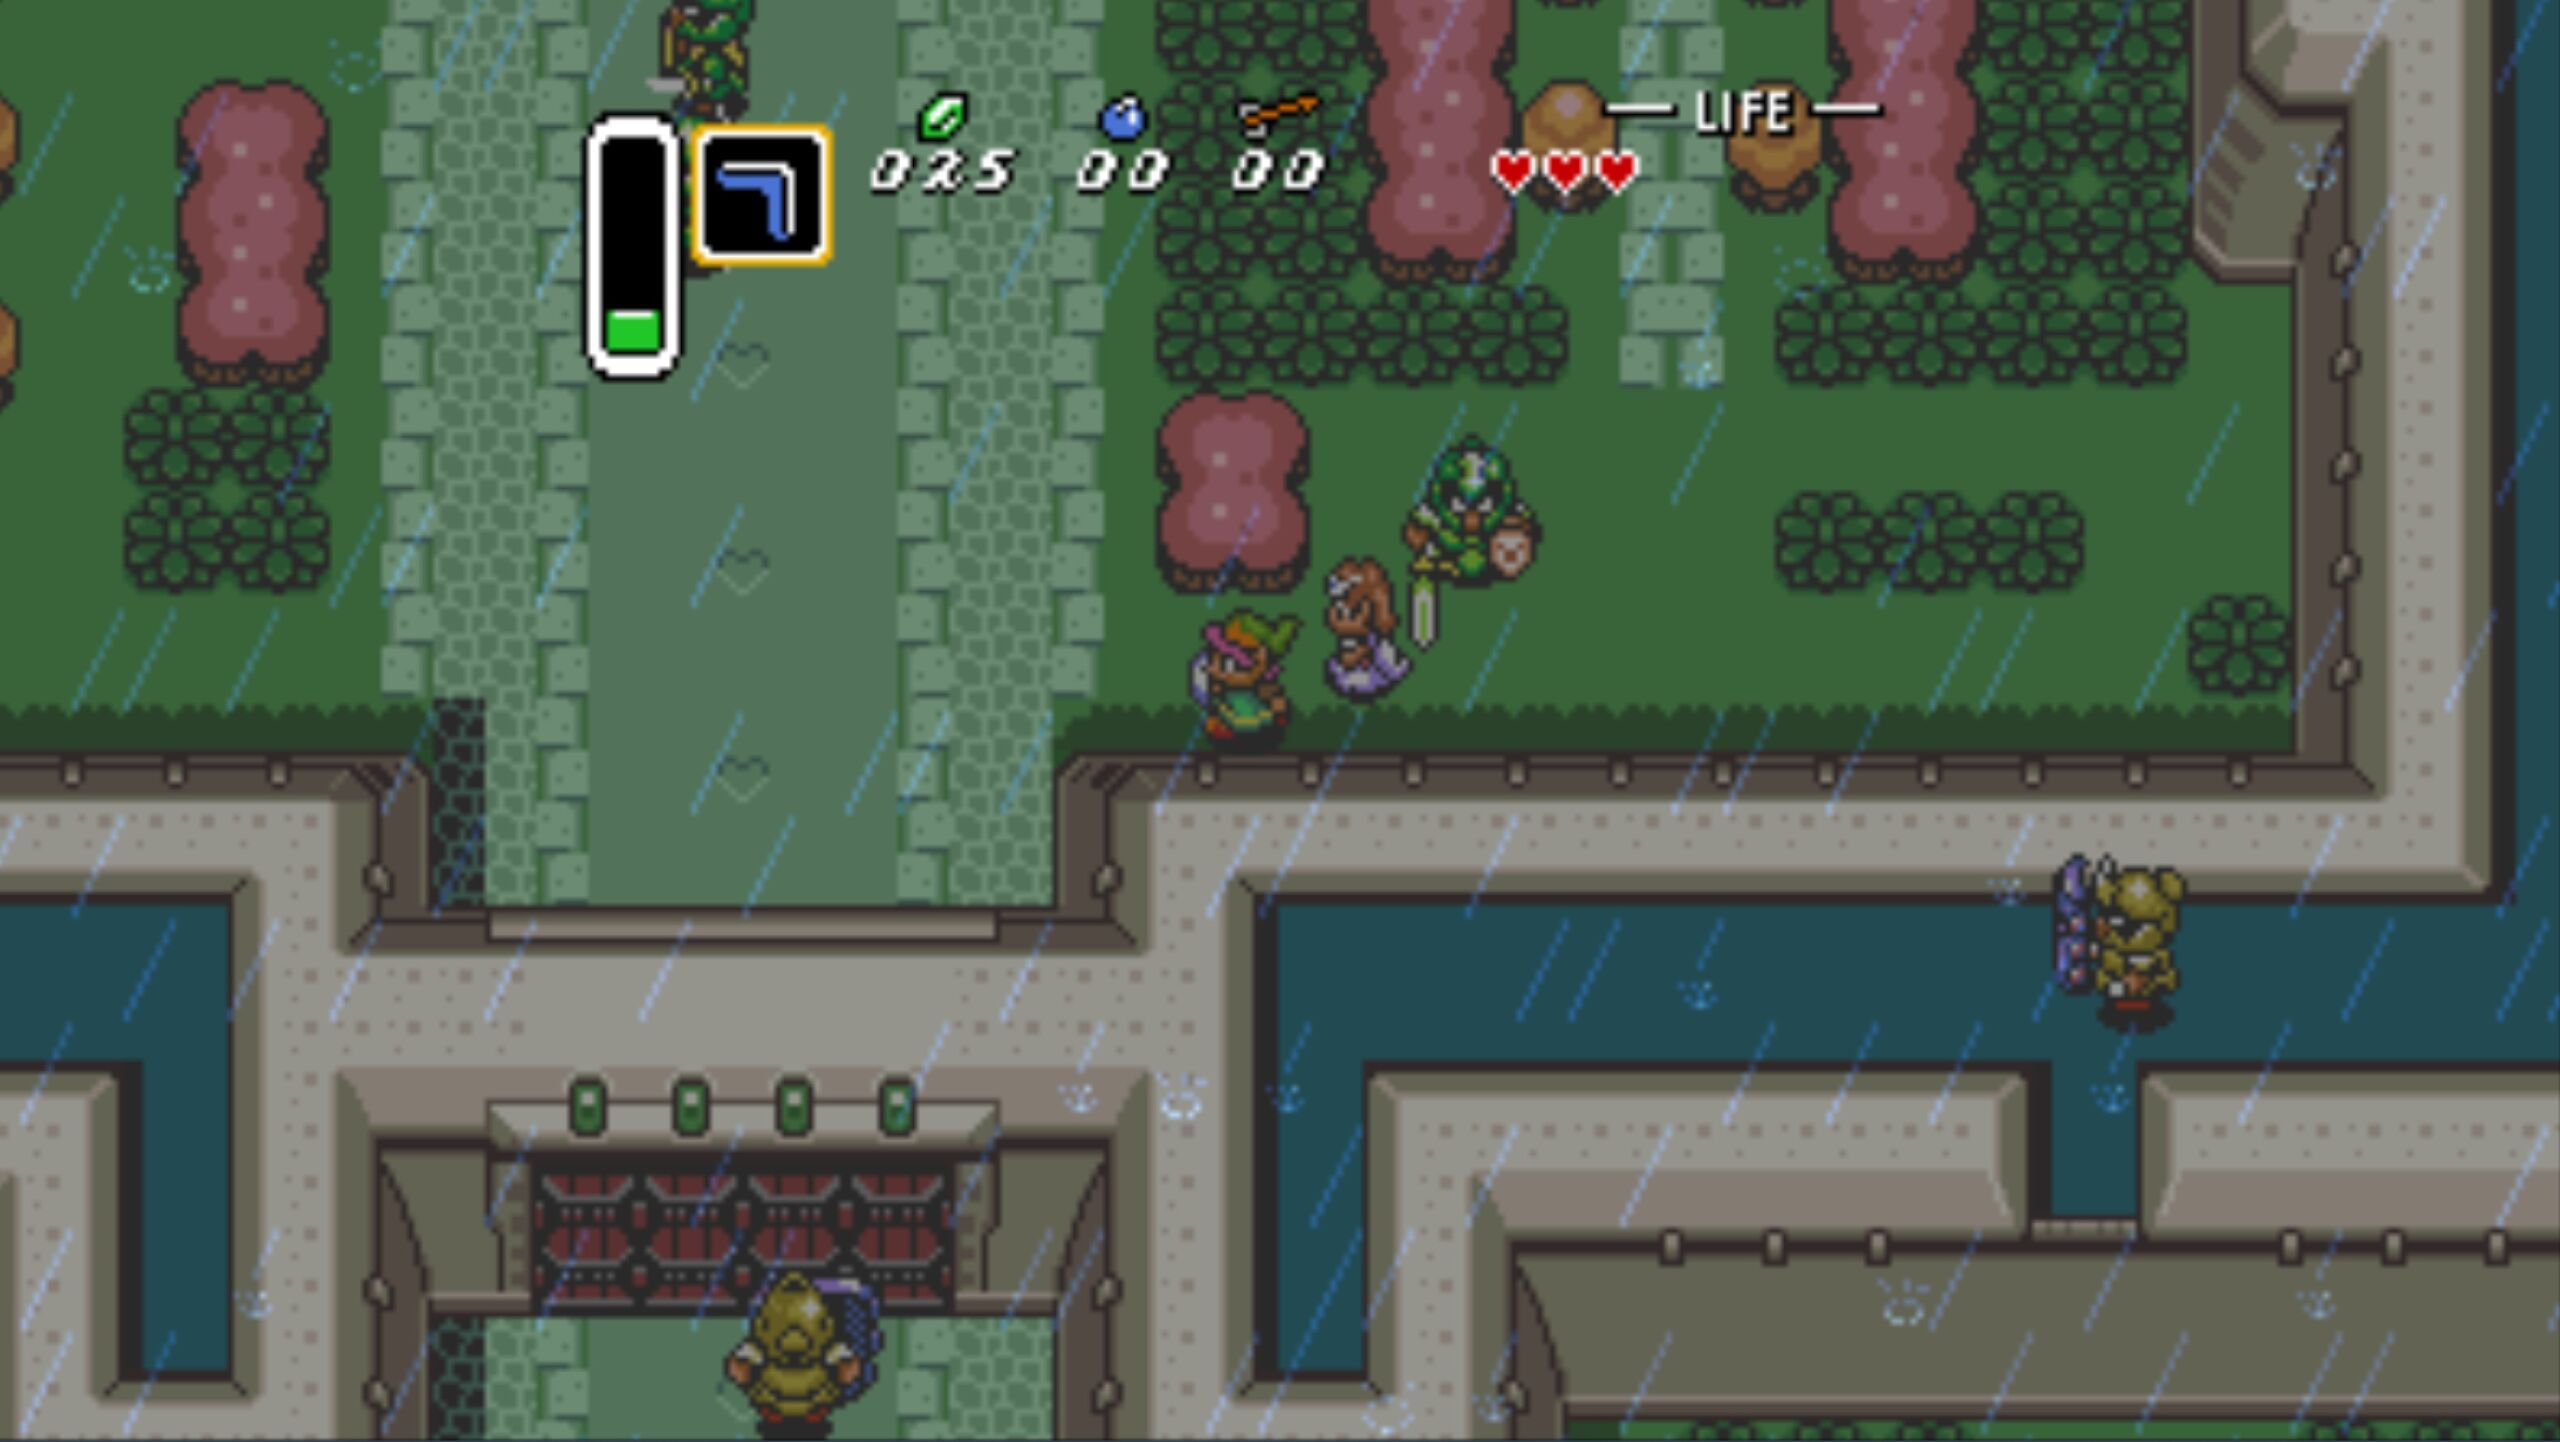 The Legend of Zelda: A Link to the Past Decompilation project emerges